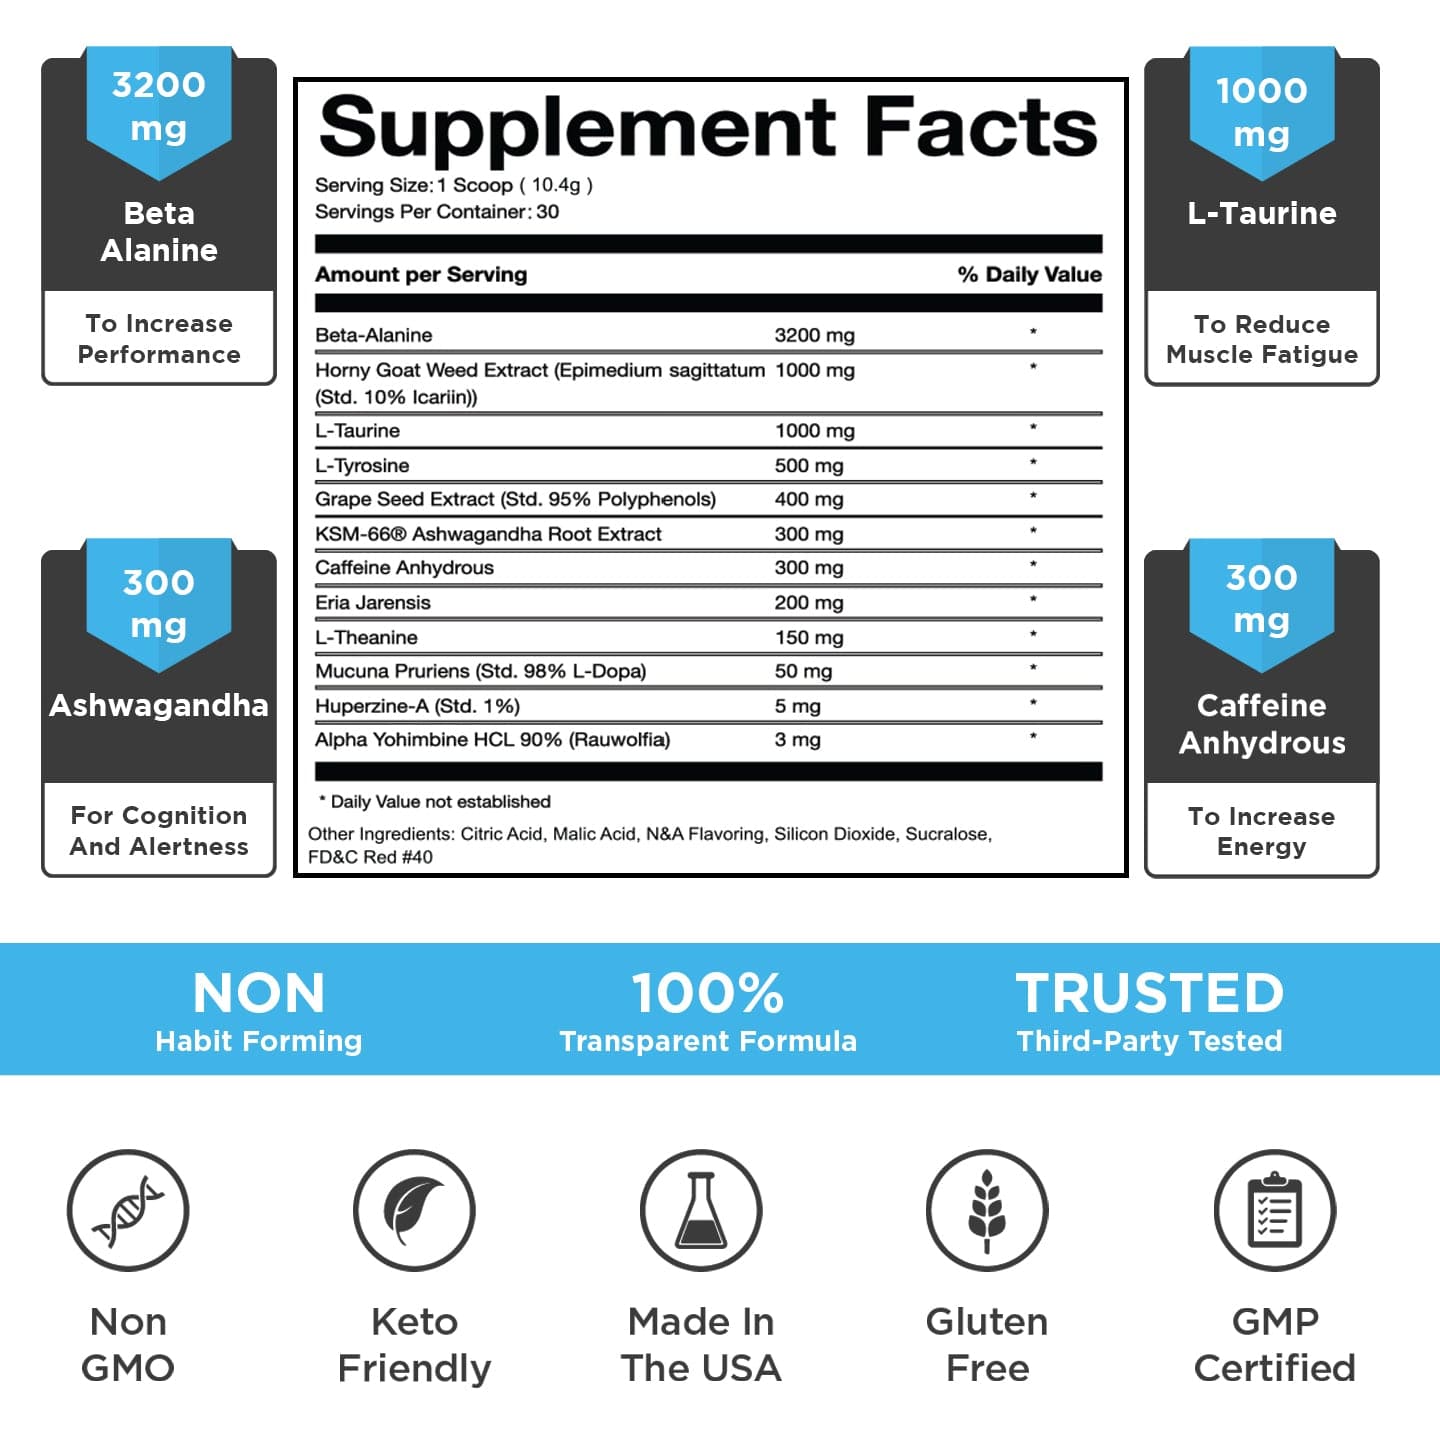 Supplement facts for the product Pure Savage